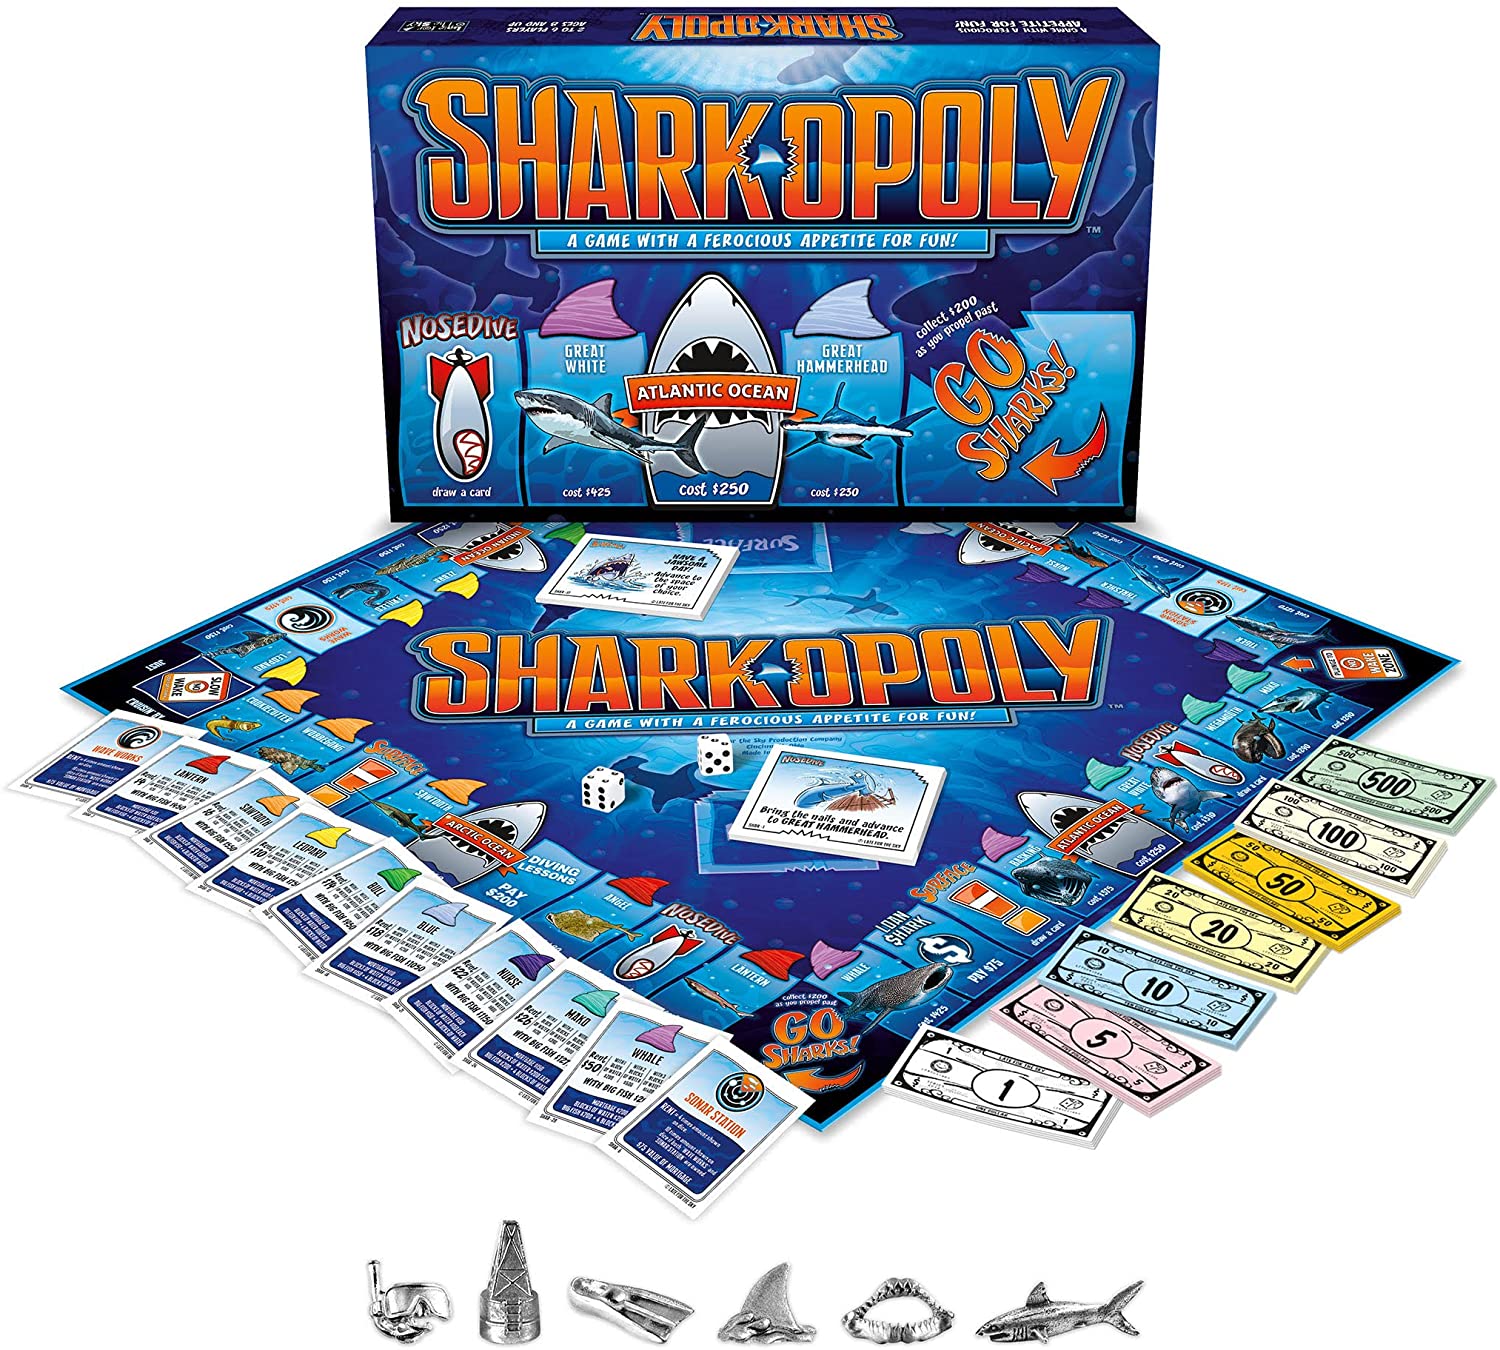 The Shark Lover’s Board Game